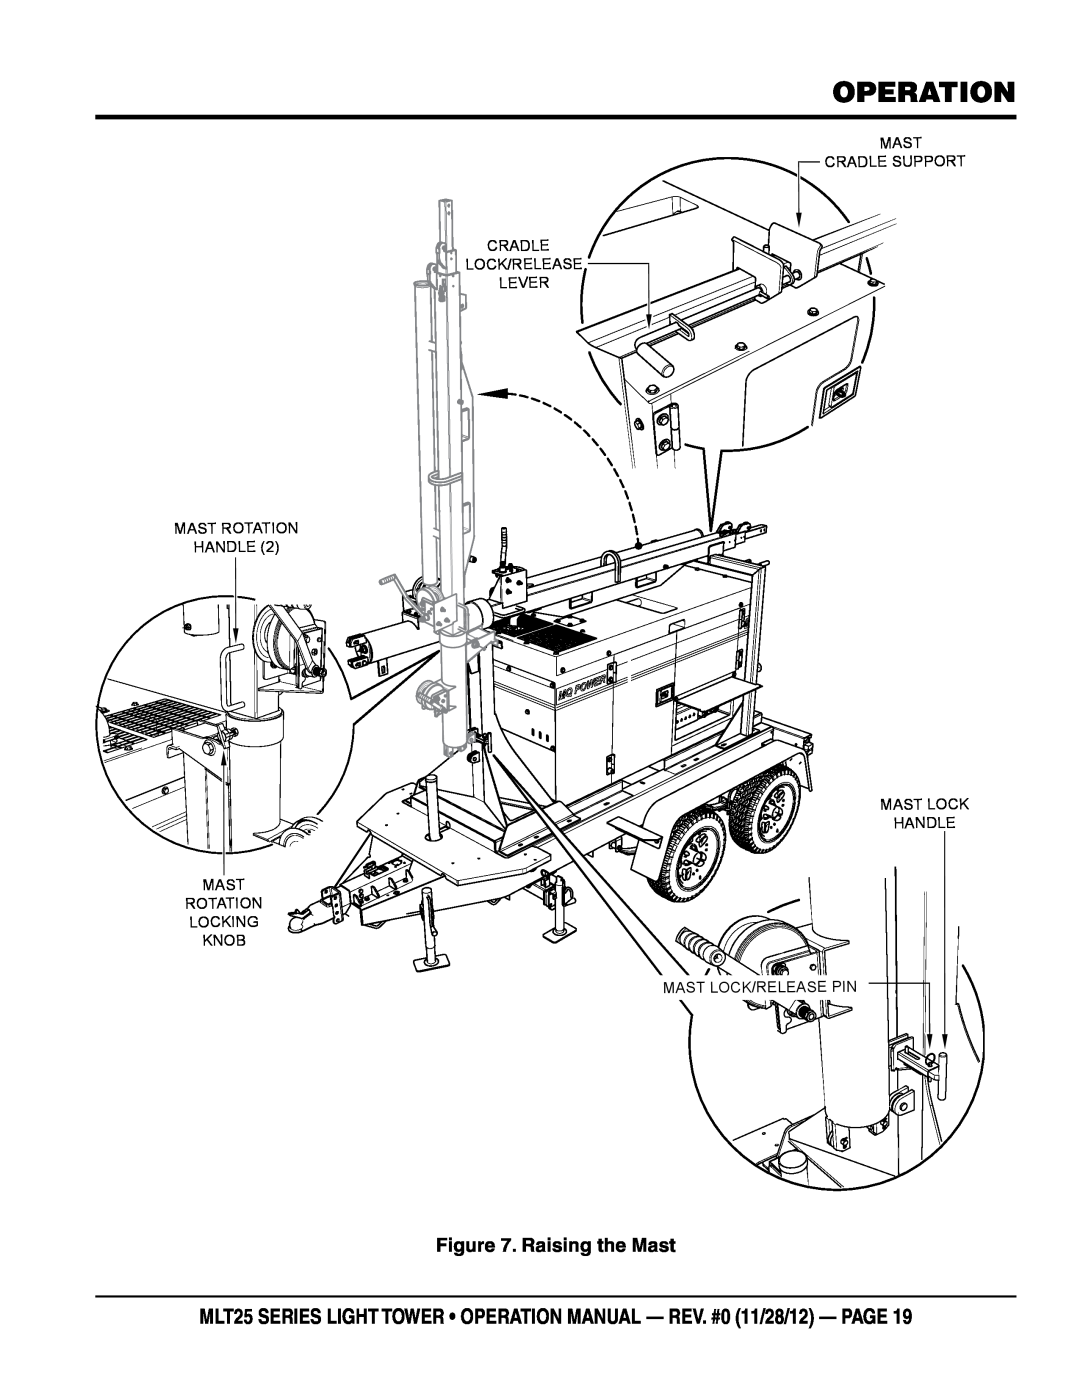 Multiquip MLT25 SERIES LIGHT TOWER operation manual - rev. #0 11/28/12 - page, Raising the Mast 